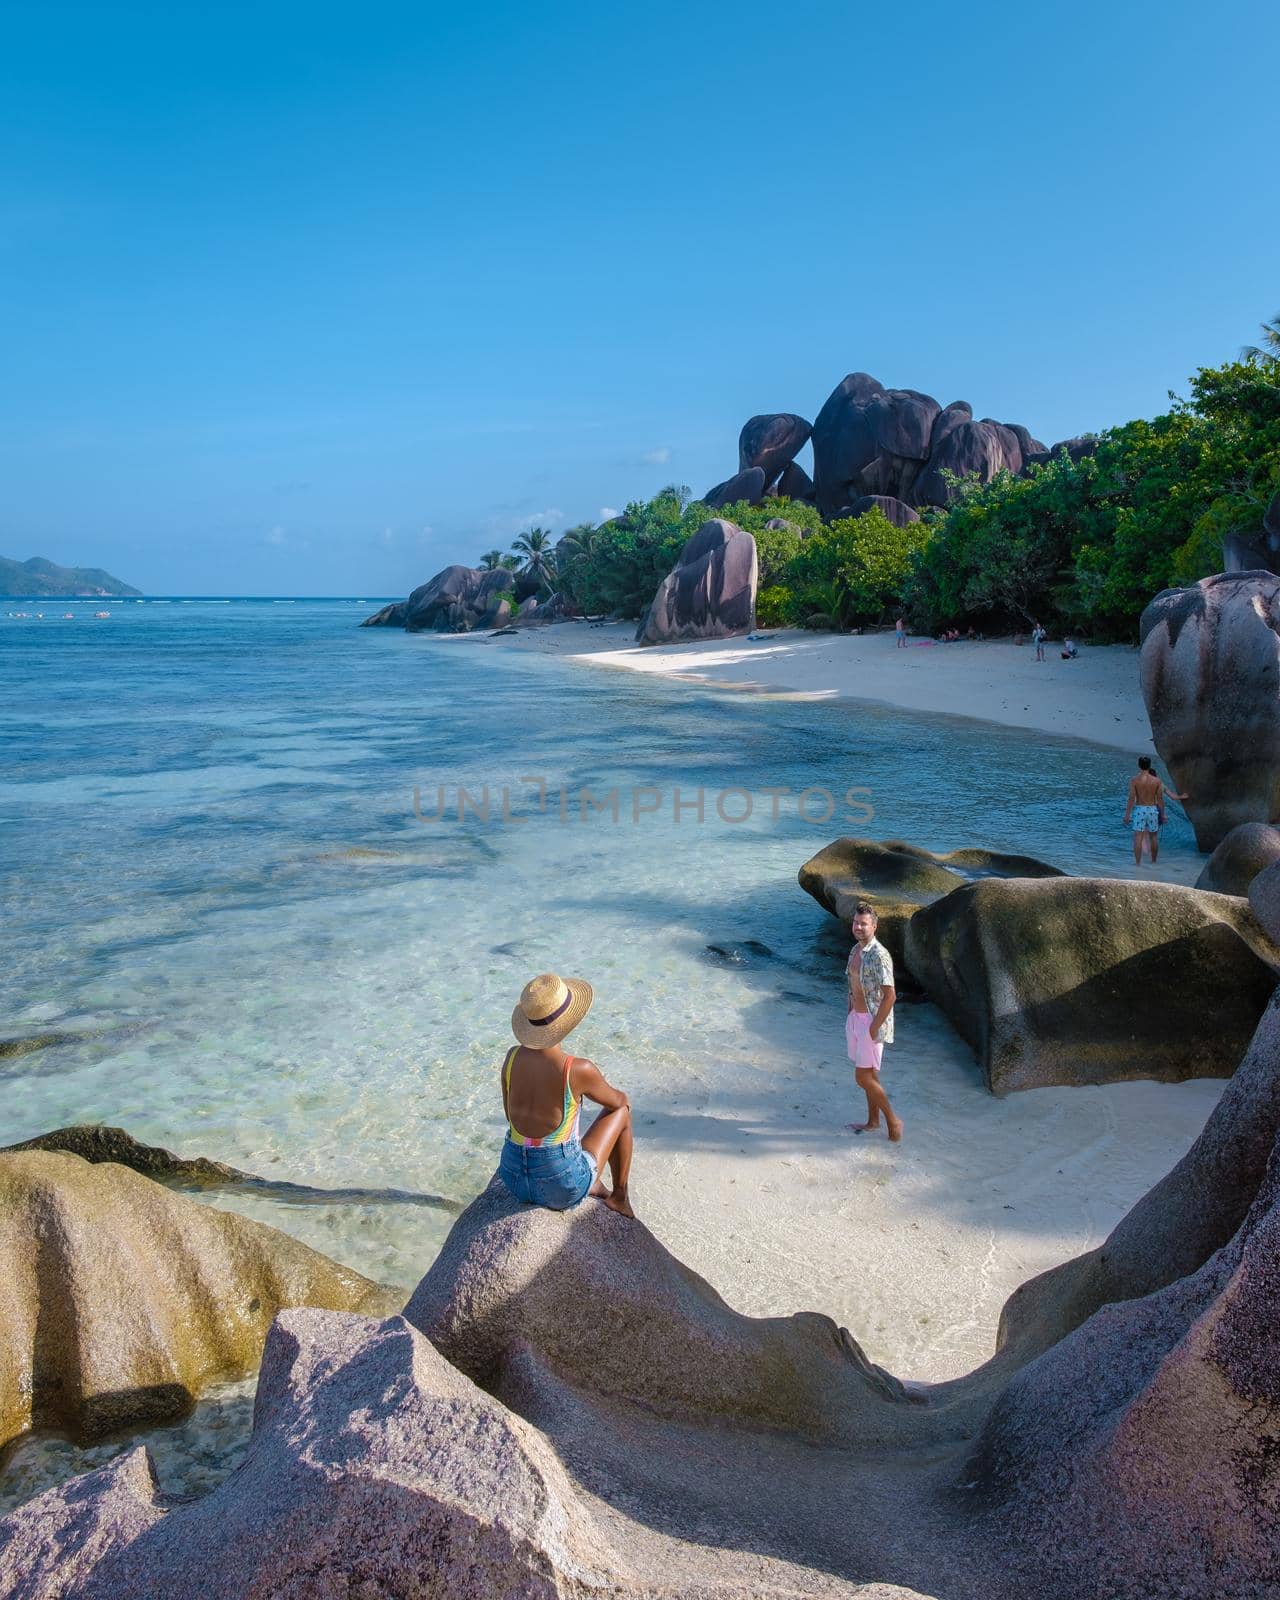 Anse Source d'Argent, La Digue Seychelles, young couple men and woman on a tropical beach during a luxury vacation in the Seychelles. Tropical beach Anse Source d'Argent, La Digue Seychelles by fokkebok